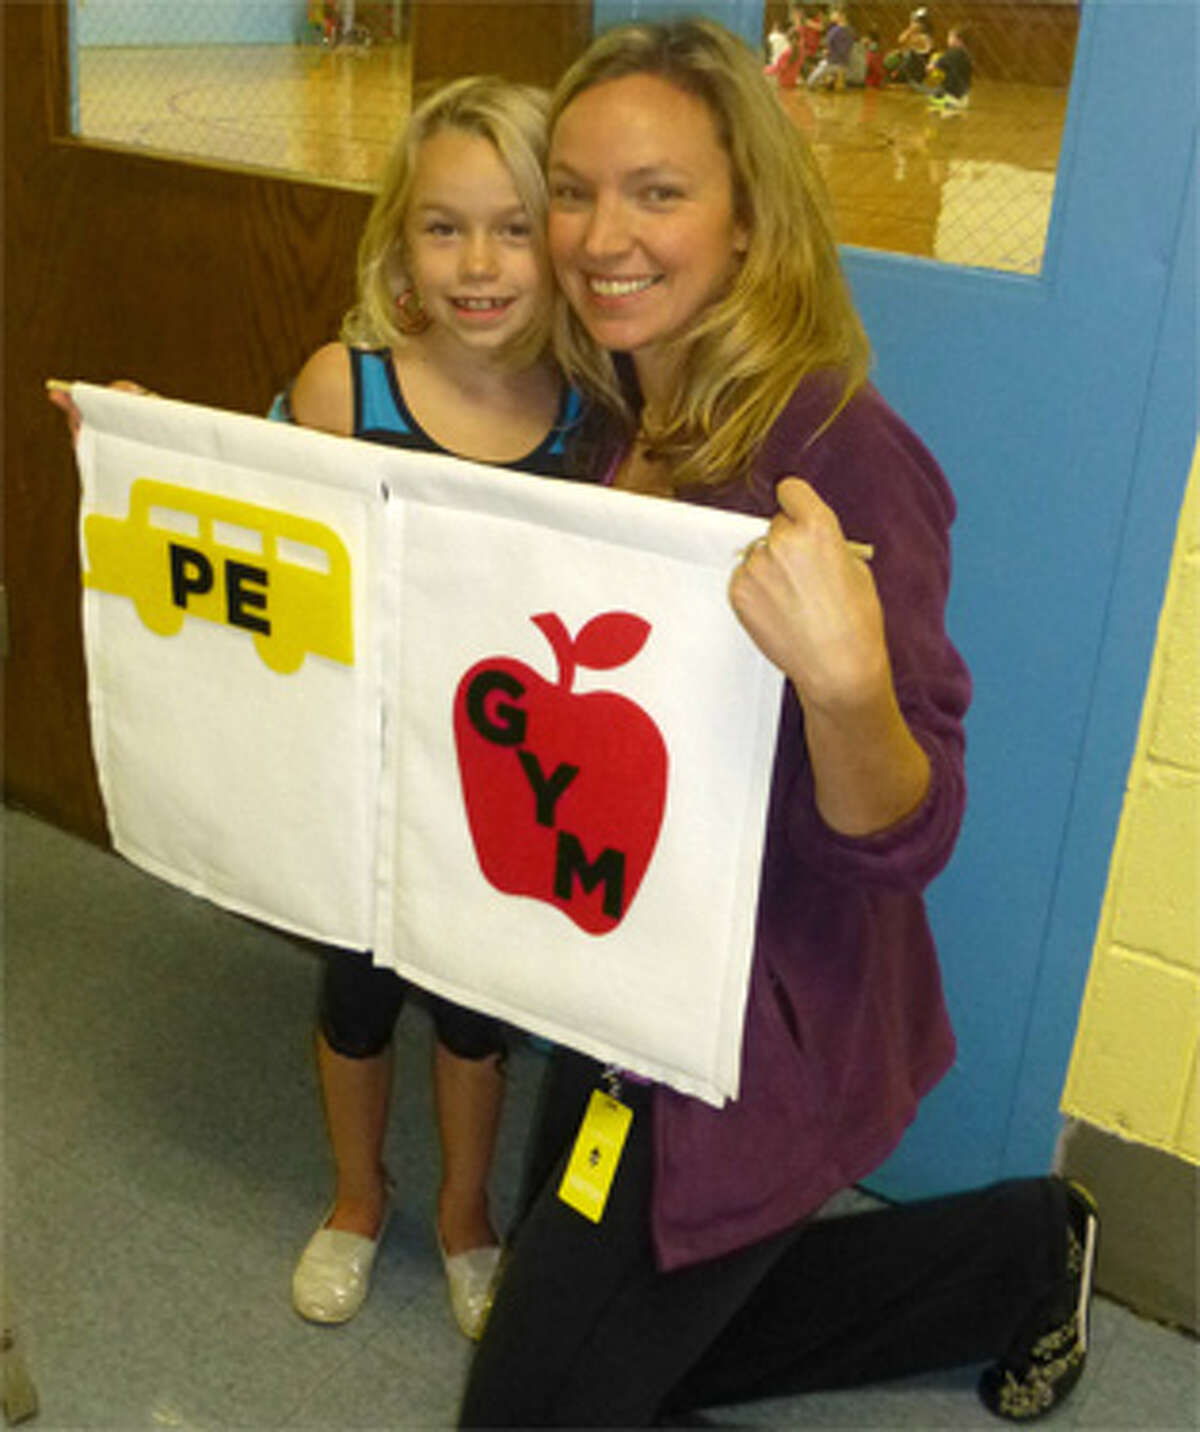 The Long Hill PTA made banners to better identify every room in the elementary school in case of an emergency.